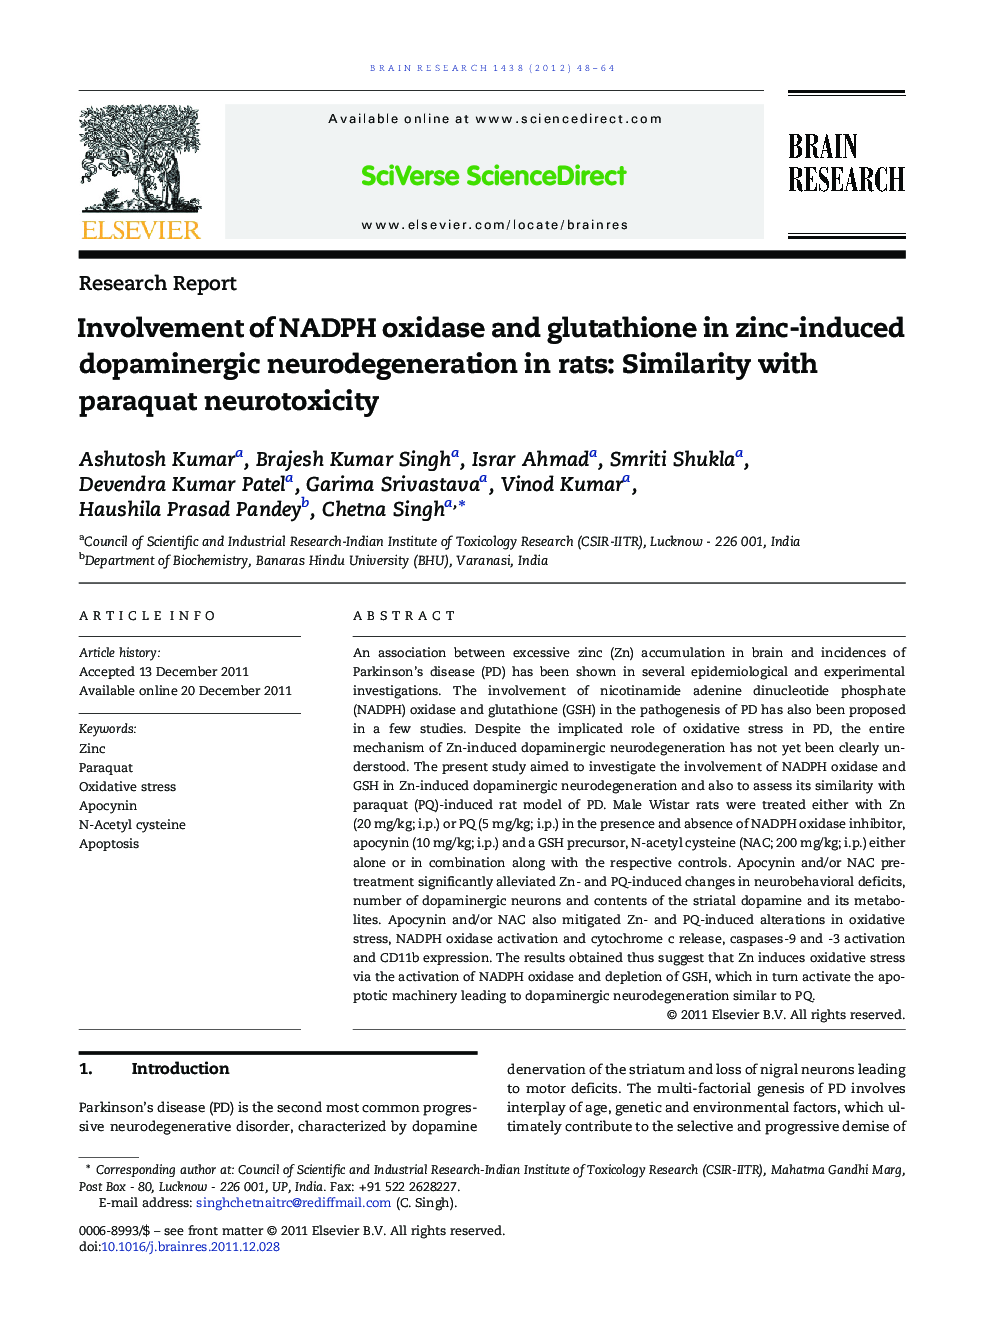 Research ReportInvolvement of NADPH oxidase and glutathione in zinc-induced dopaminergic neurodegeneration in rats: Similarity with paraquat neurotoxicity